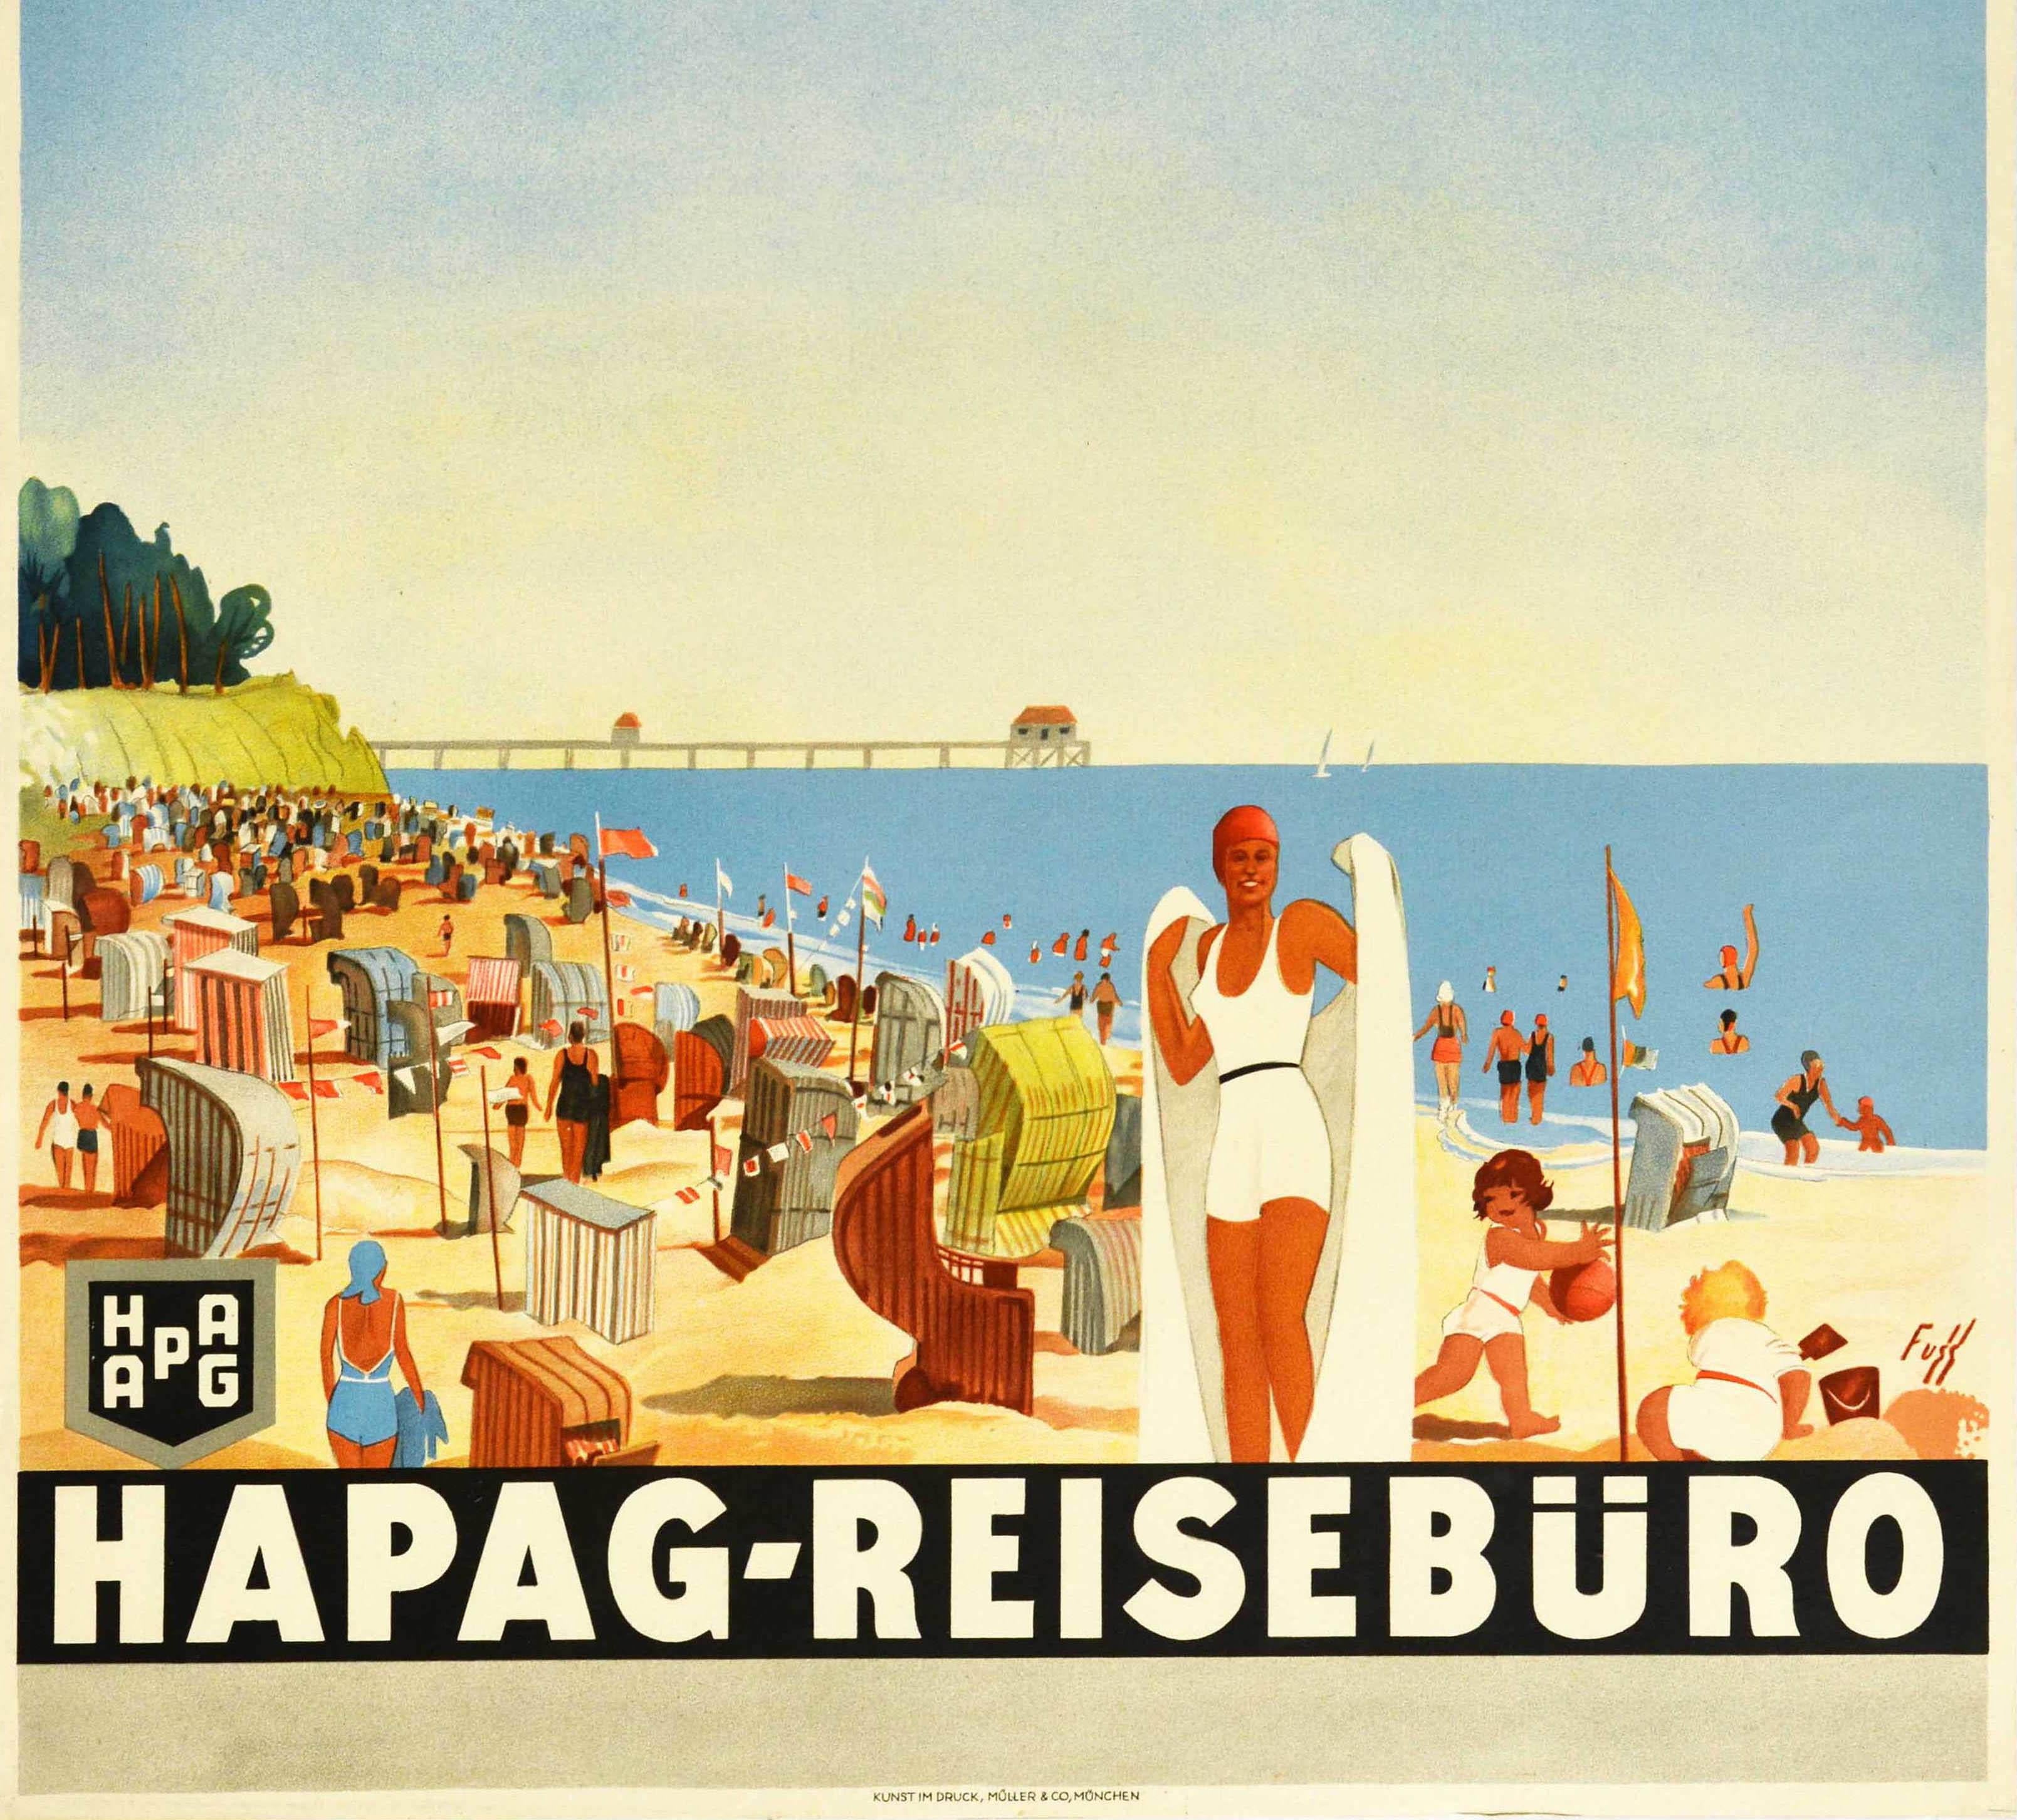 Original vintage travel poster for Hapag Reiseburo travel agency featuring a stunning Art Deco design by Albert Fuss (1889-1969) showing a lady in a fashionable swimsuit covering herself with a white towel in front of a summer seaside holiday scene